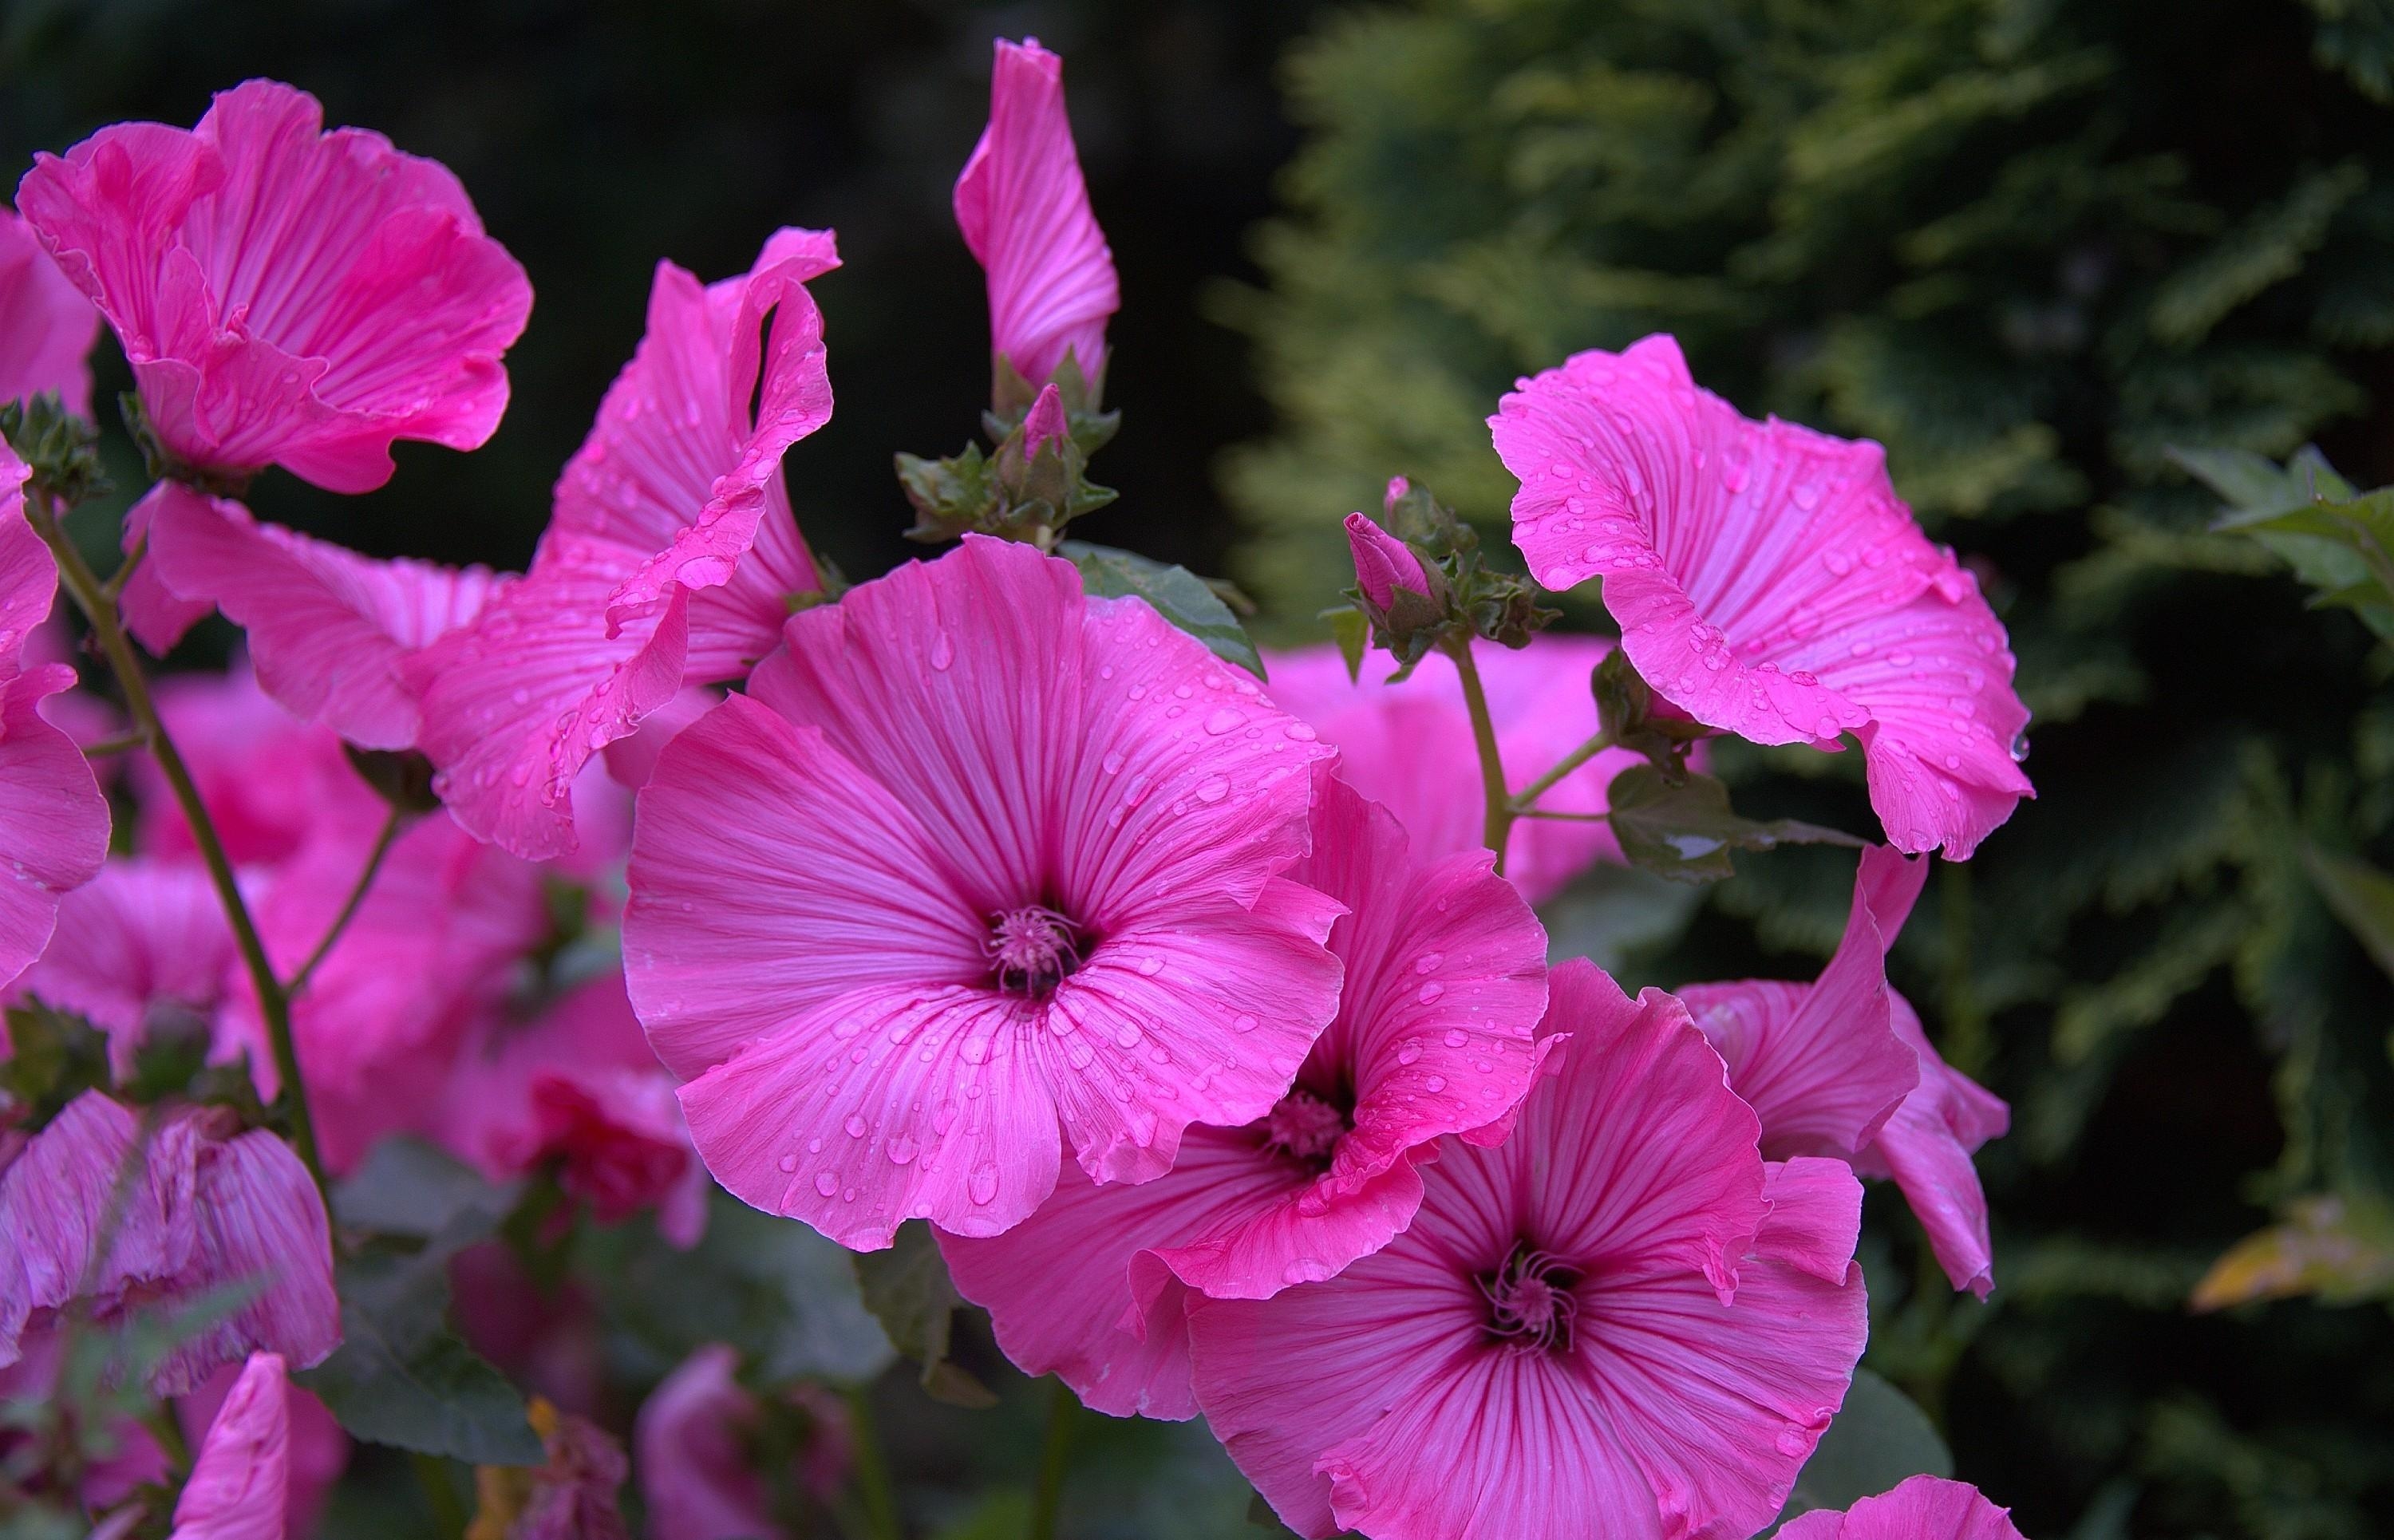 flowers, drops, flowerbed, close up, flower bed, lavatera High Definition image